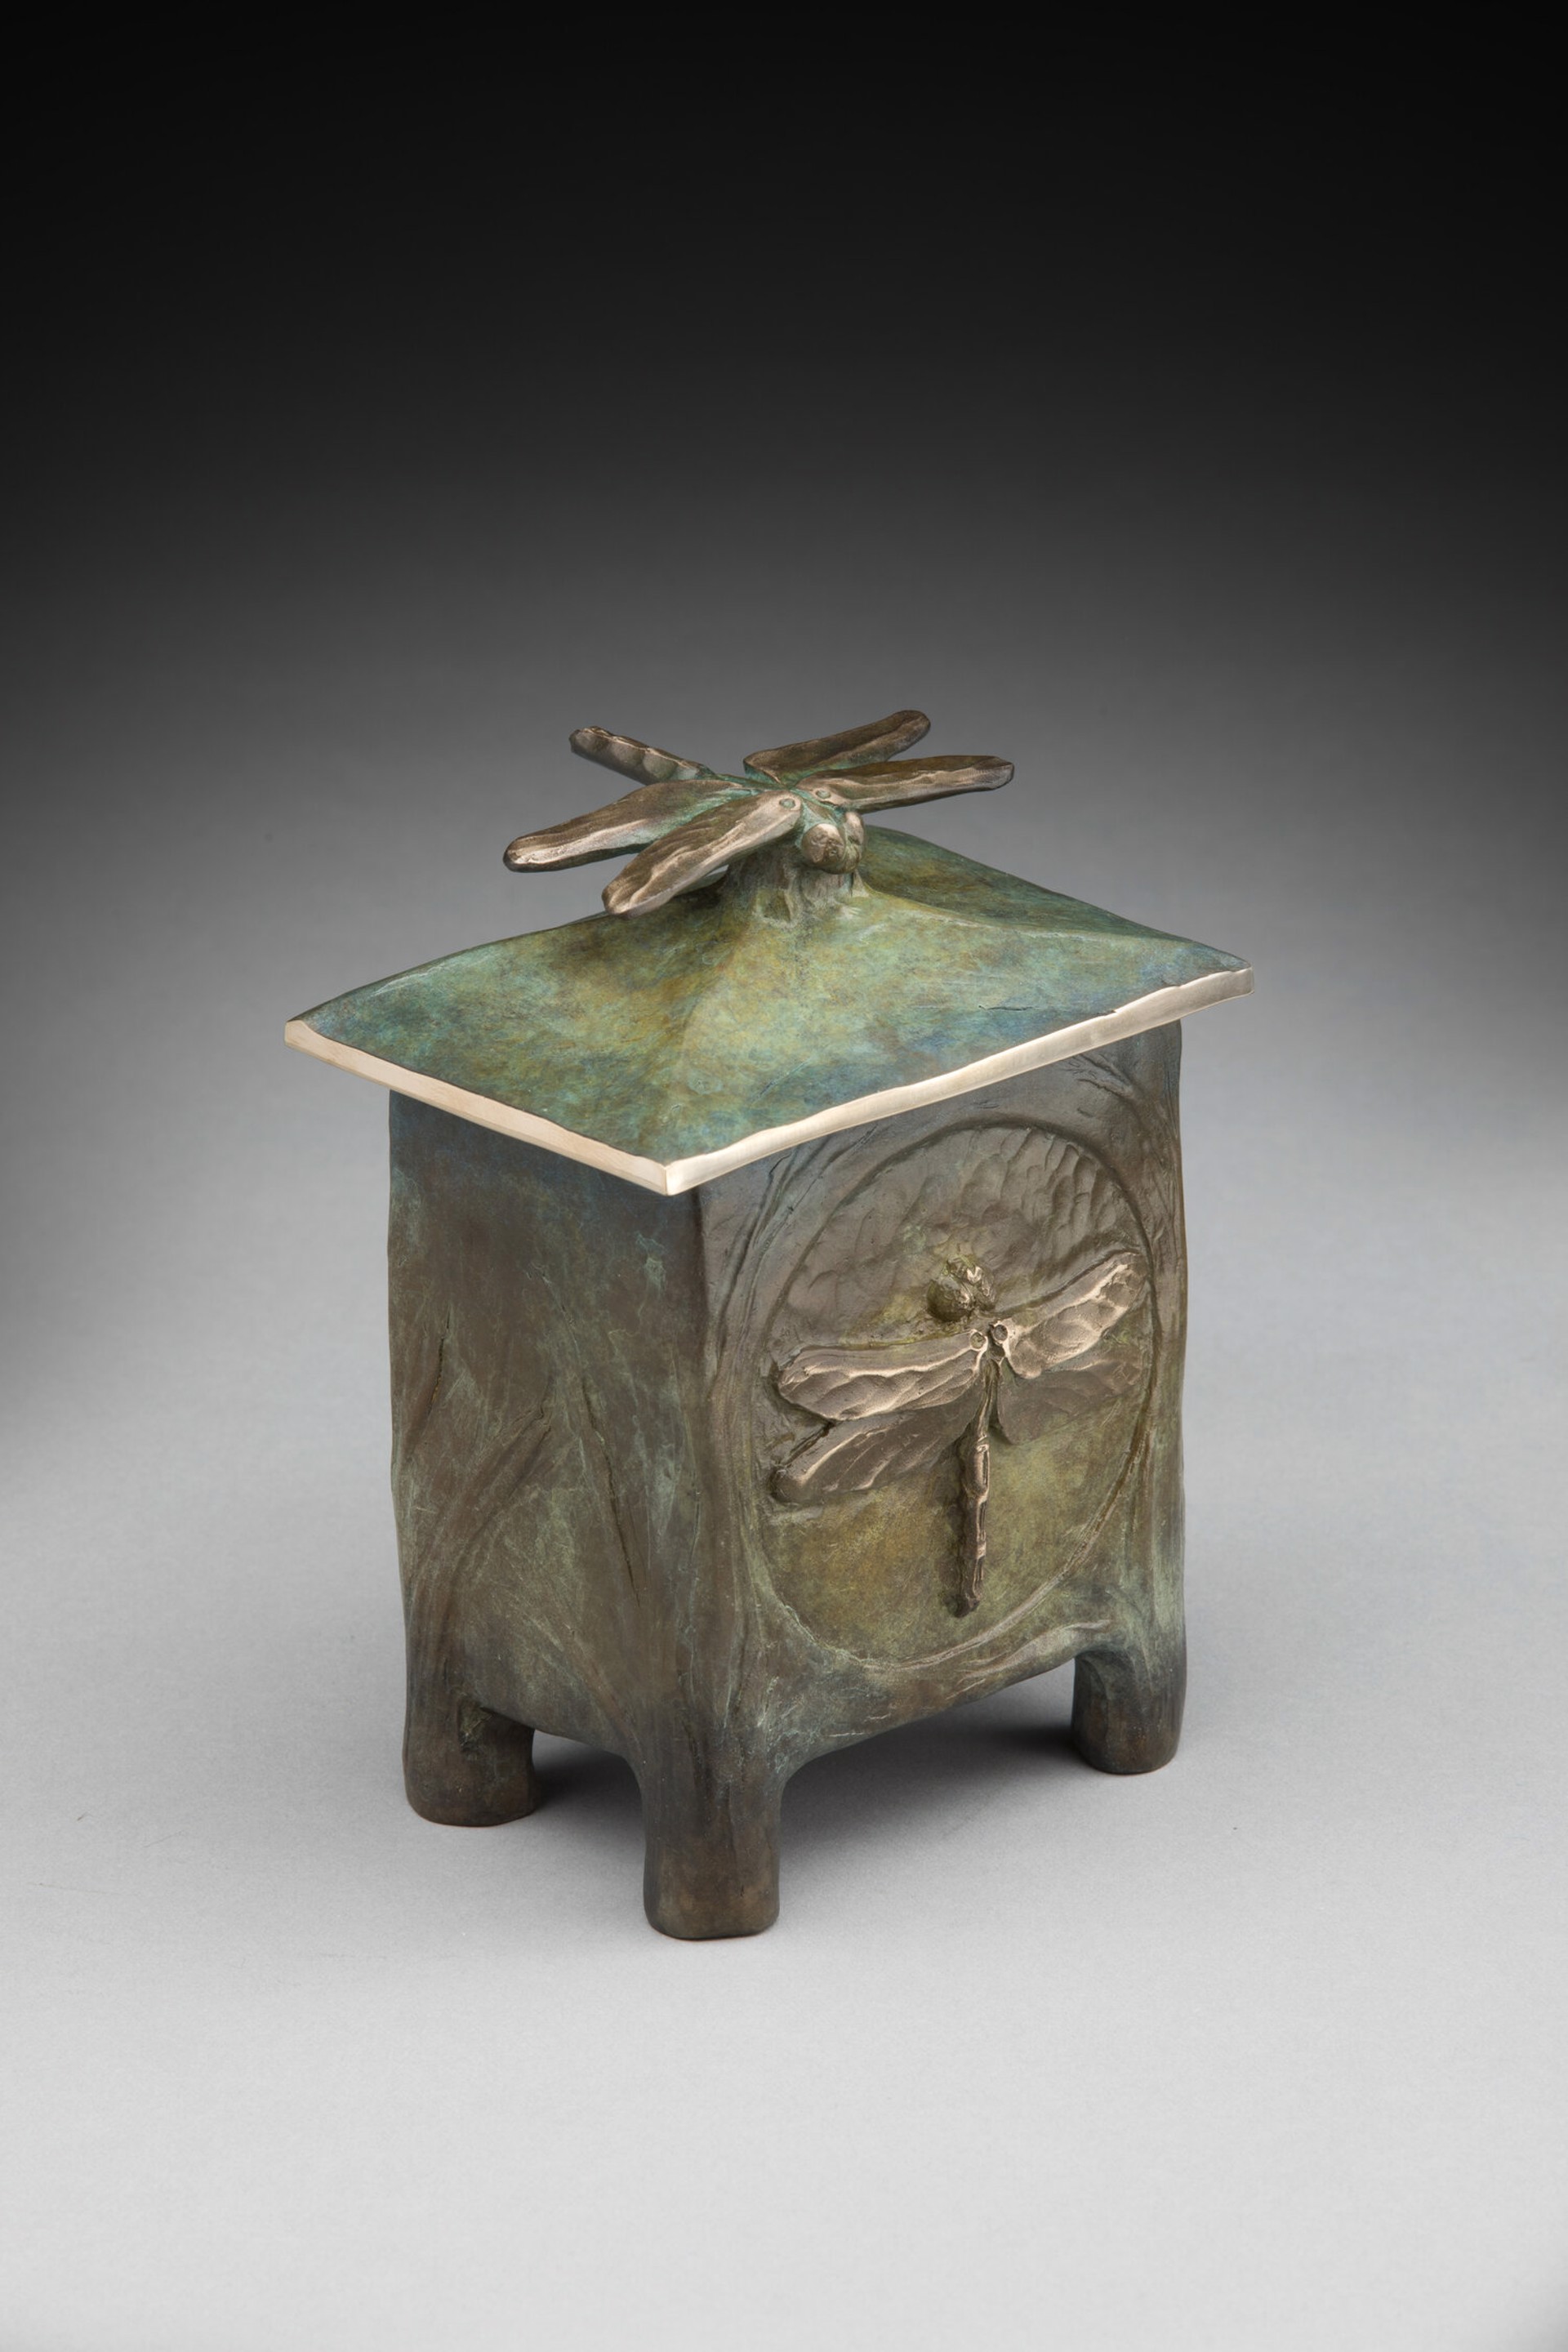 Dragonfly Vessel by JAMES MOORE